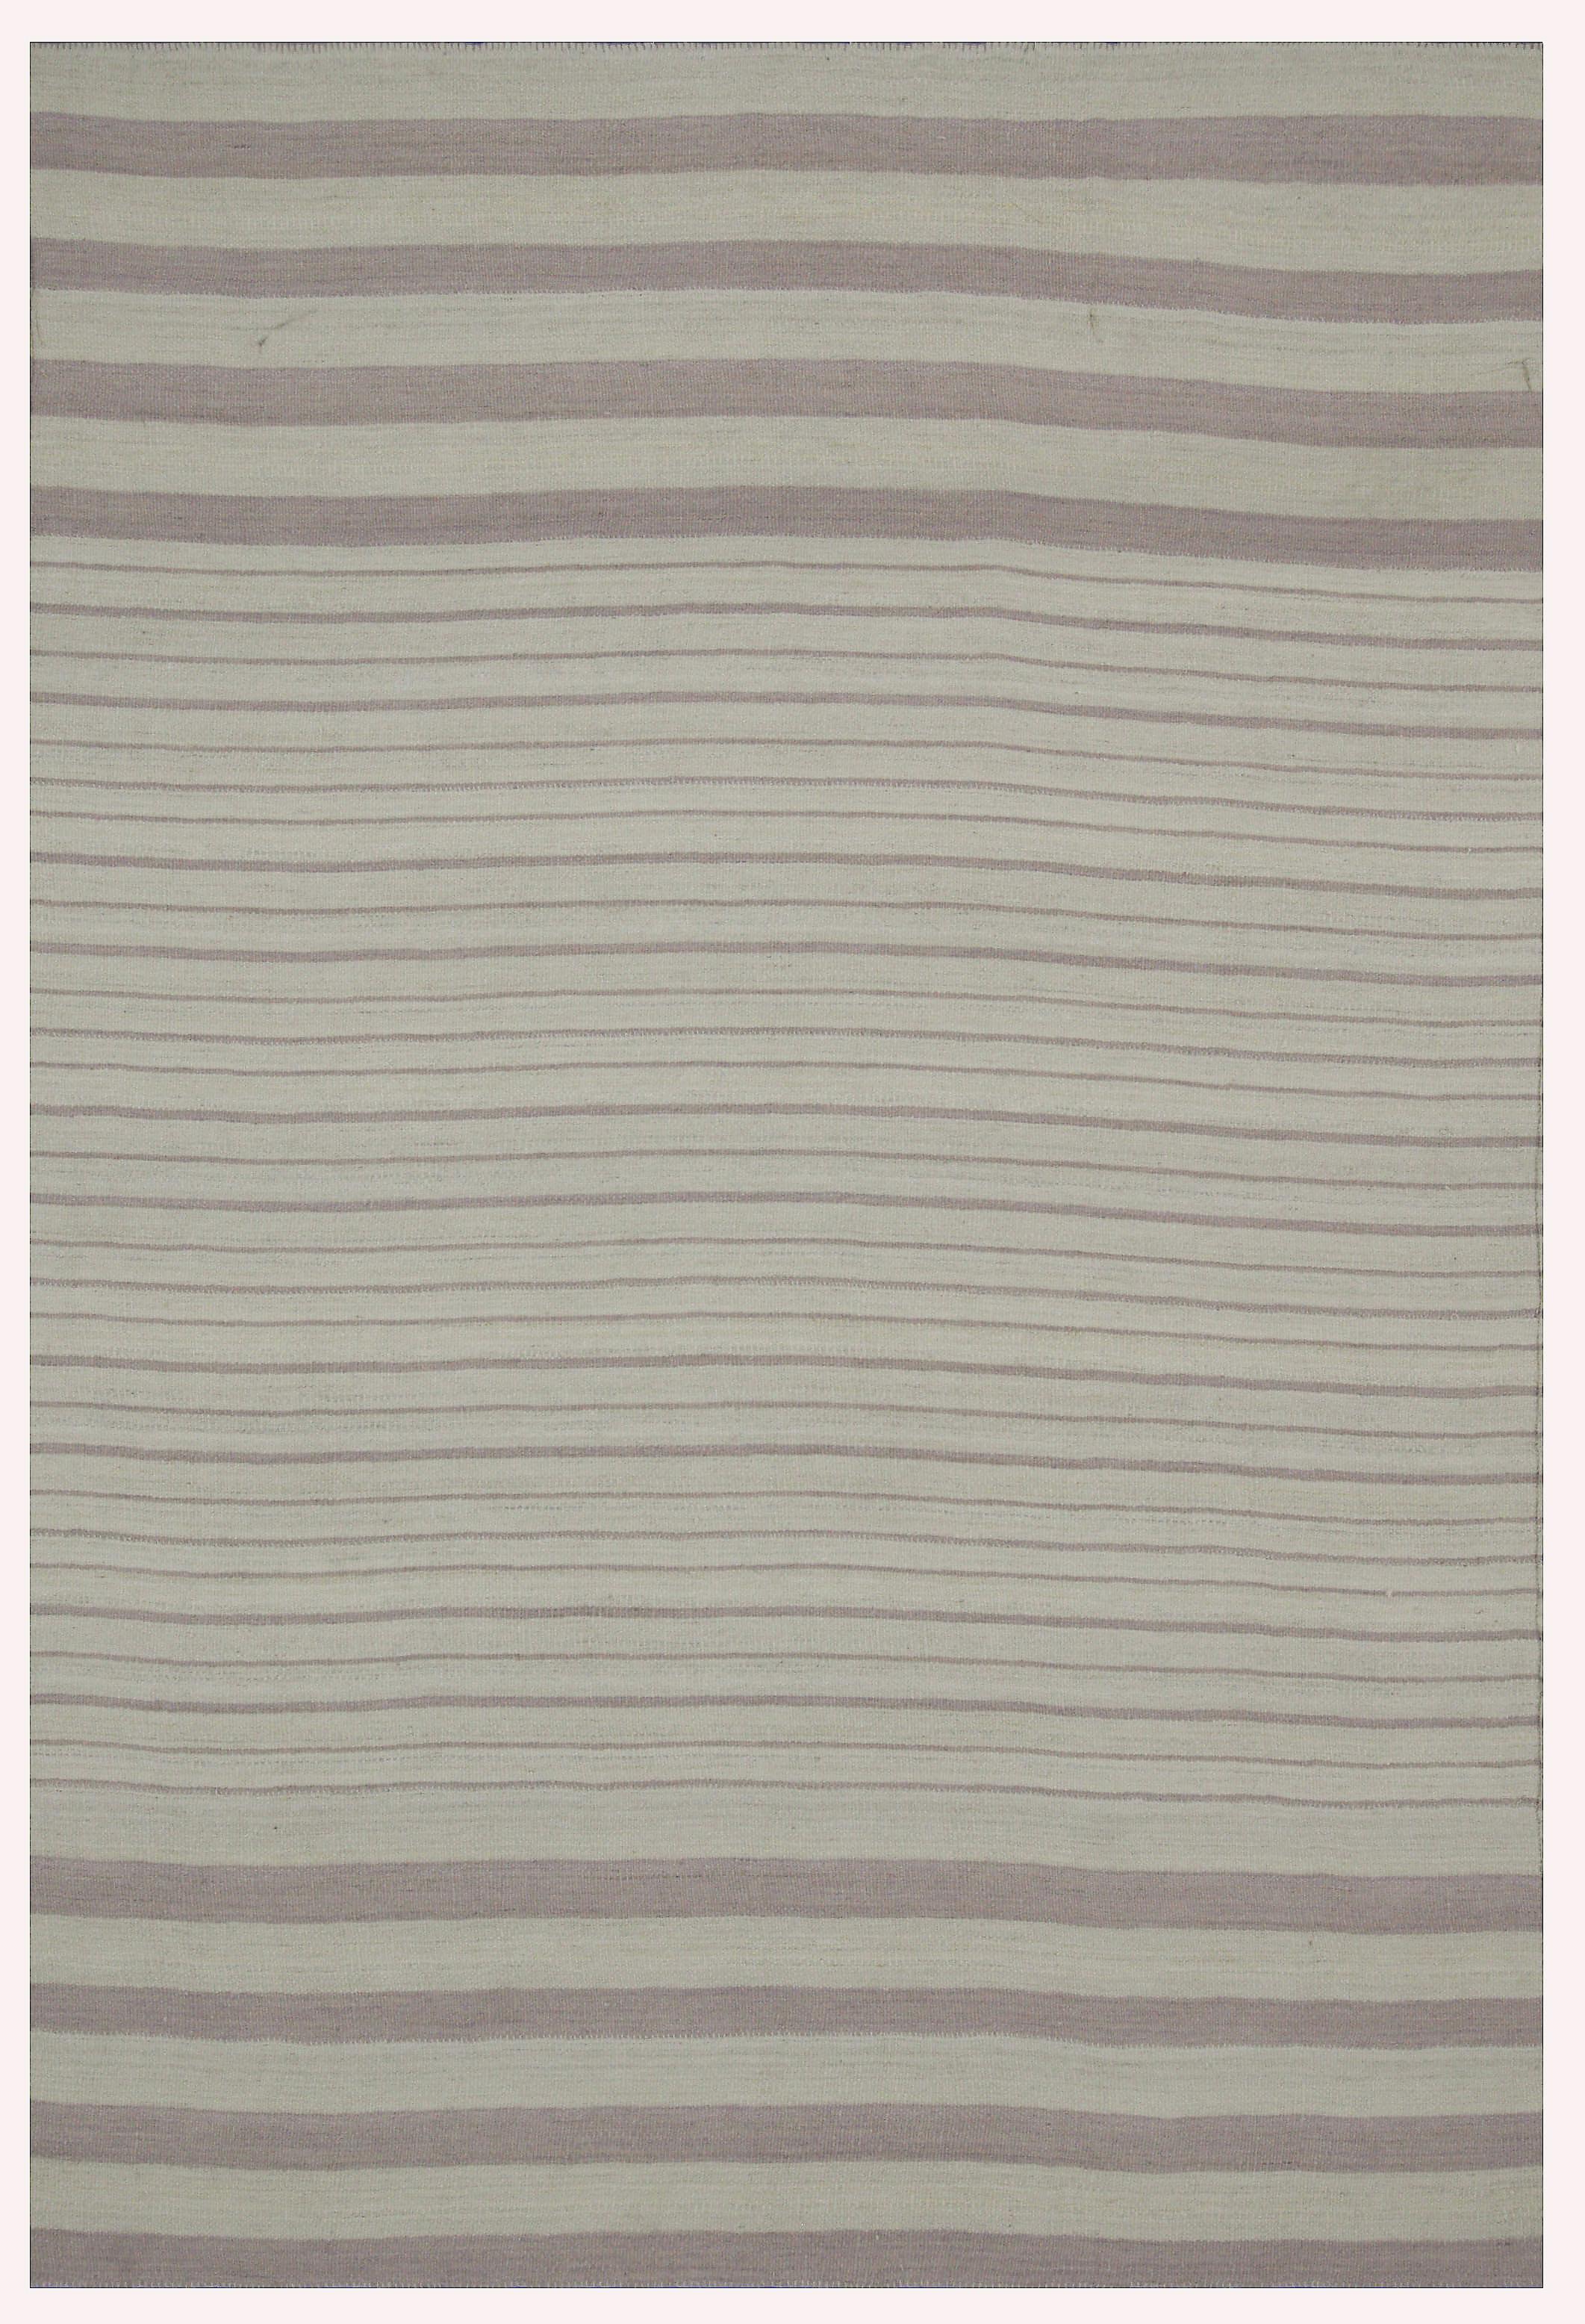 A new production Turkish rug handwoven from the finest sheep’s wool and colored with all-natural vegetable dyes that are safe for humans and pets. It’s a traditional Kilim flat-weave design featuring a beautiful ivory field with gray stripes. It’s a